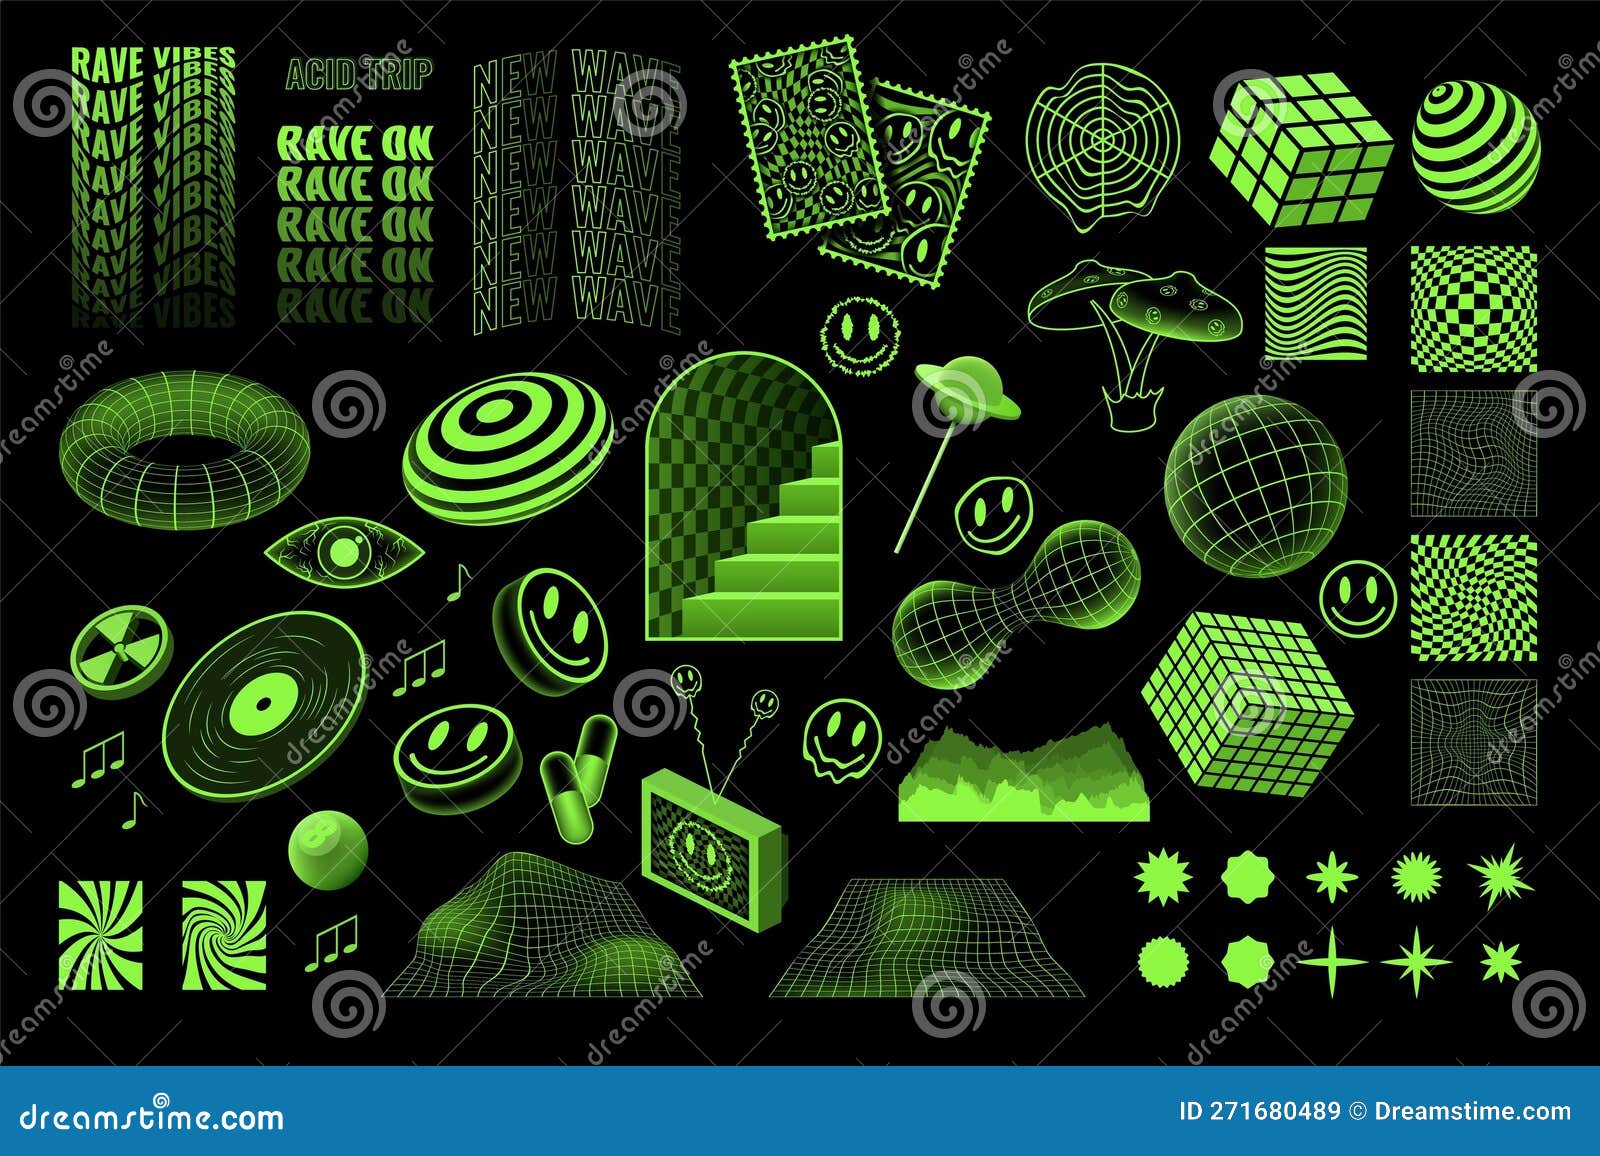 Trendy Y2k Poster With Geaometrc Vector 3d Wireframe Model And